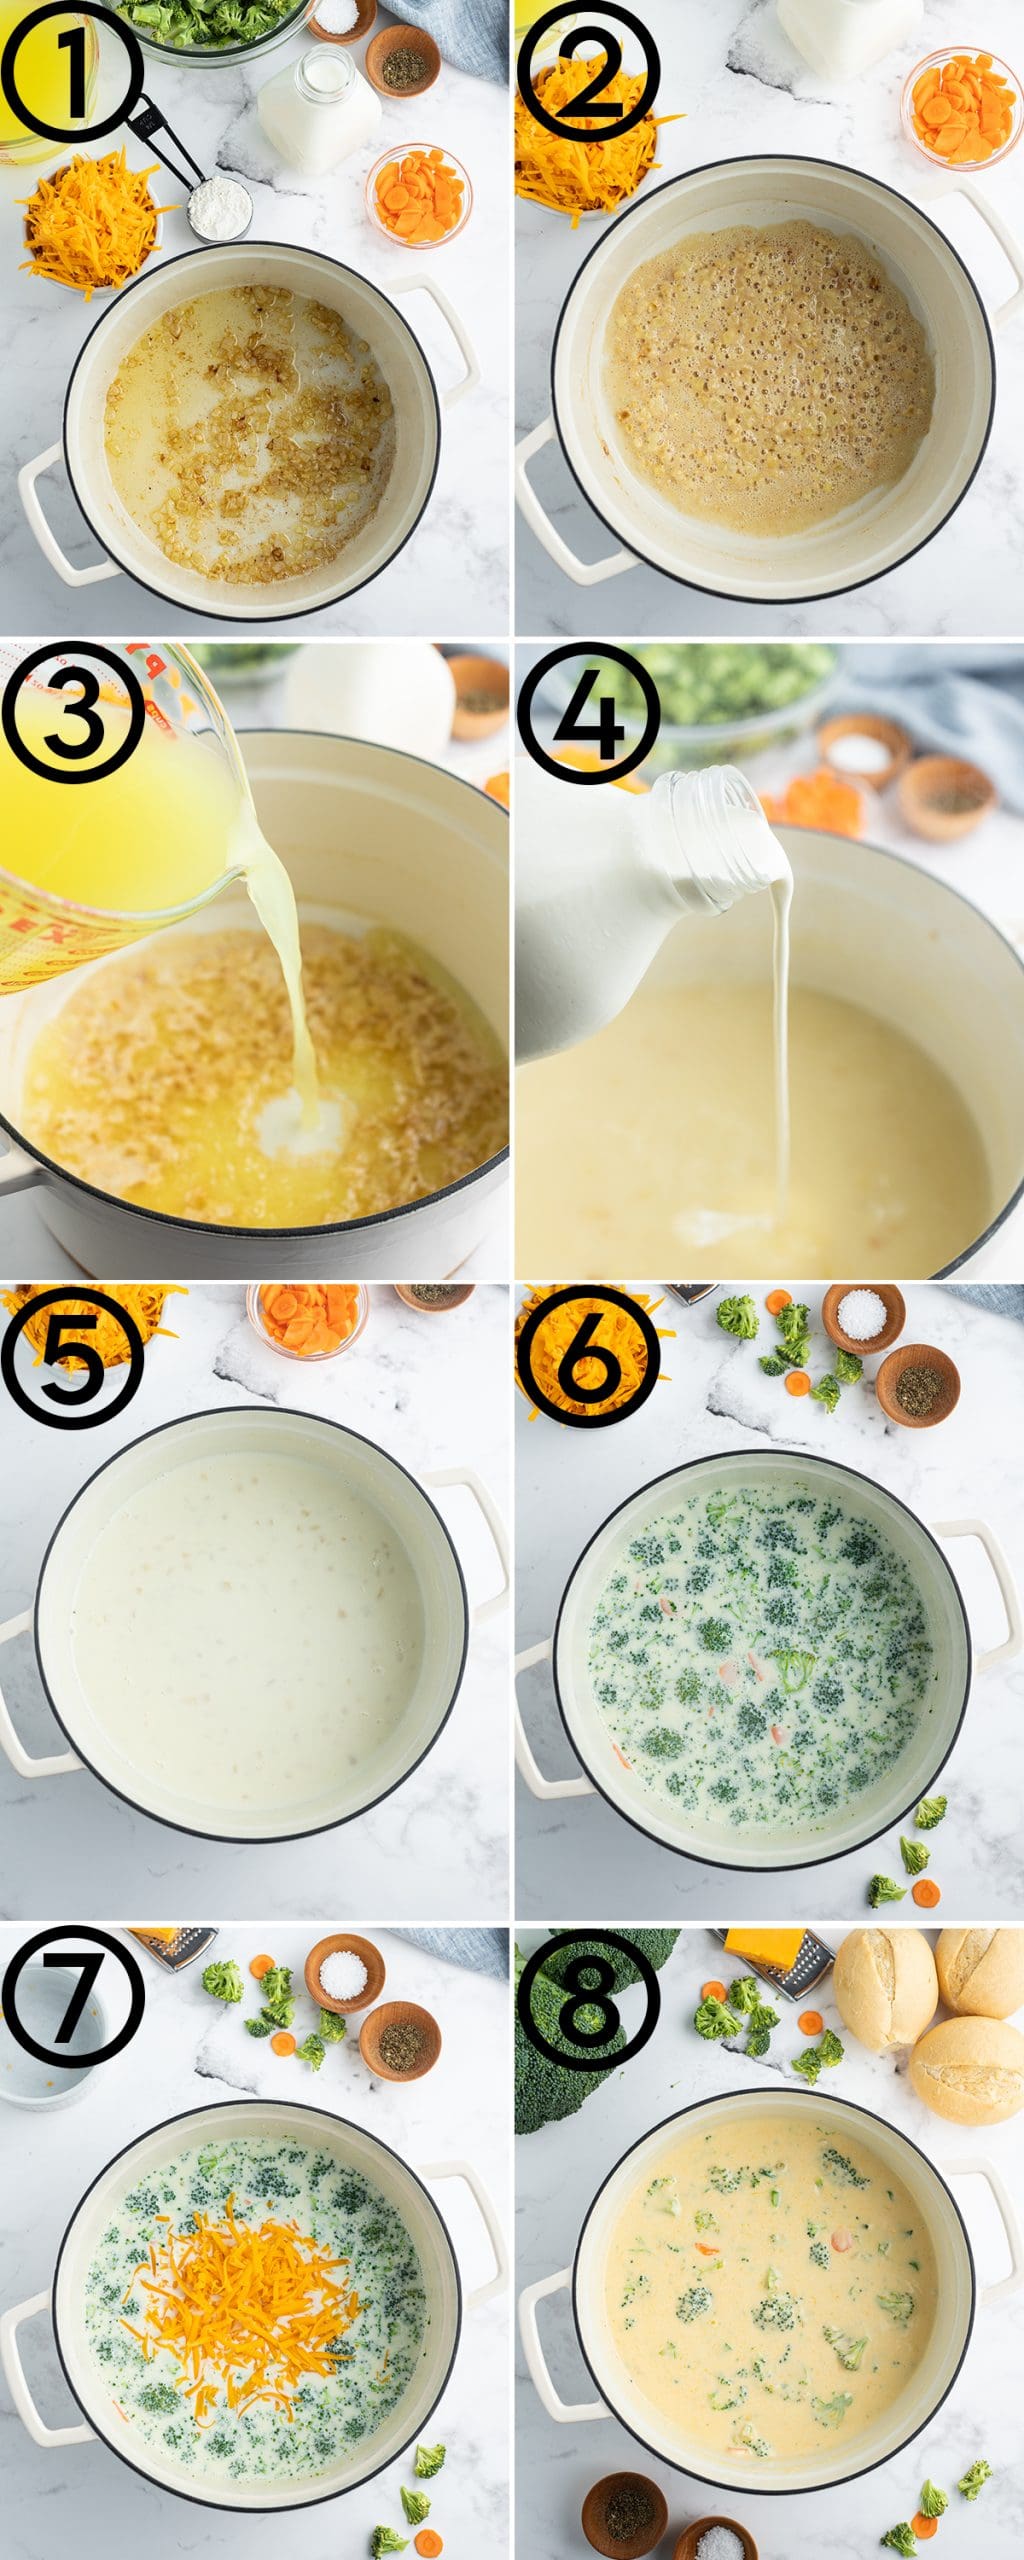 A collage of images showing how to make broccoli cheese soup.